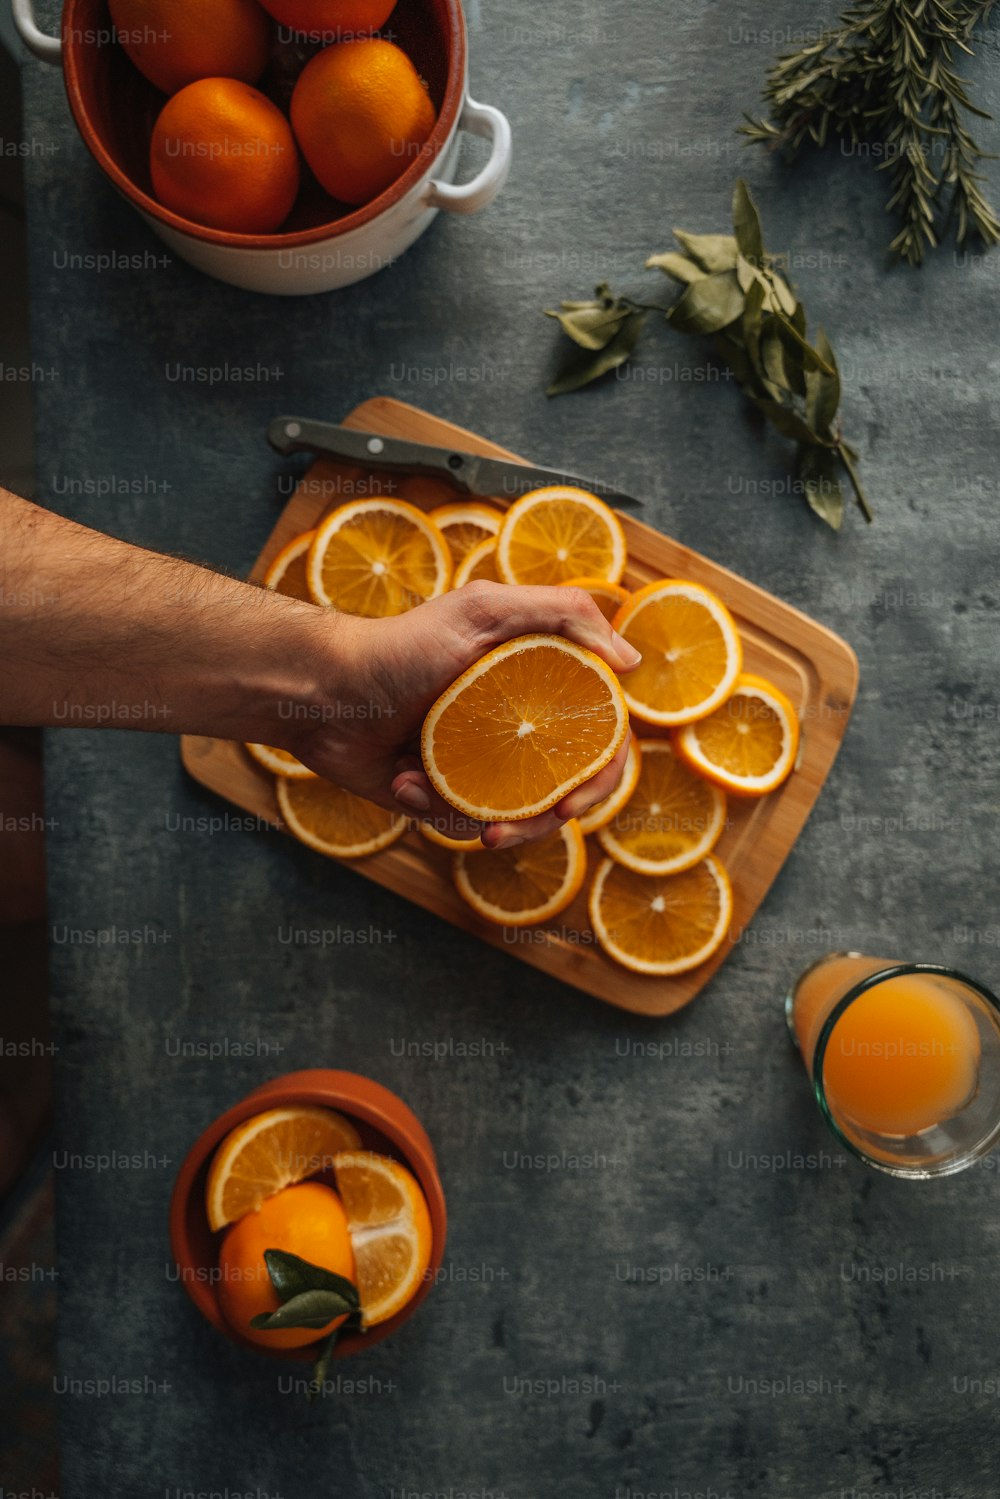 a cutting board topped with sliced oranges next to a cup of orange juice